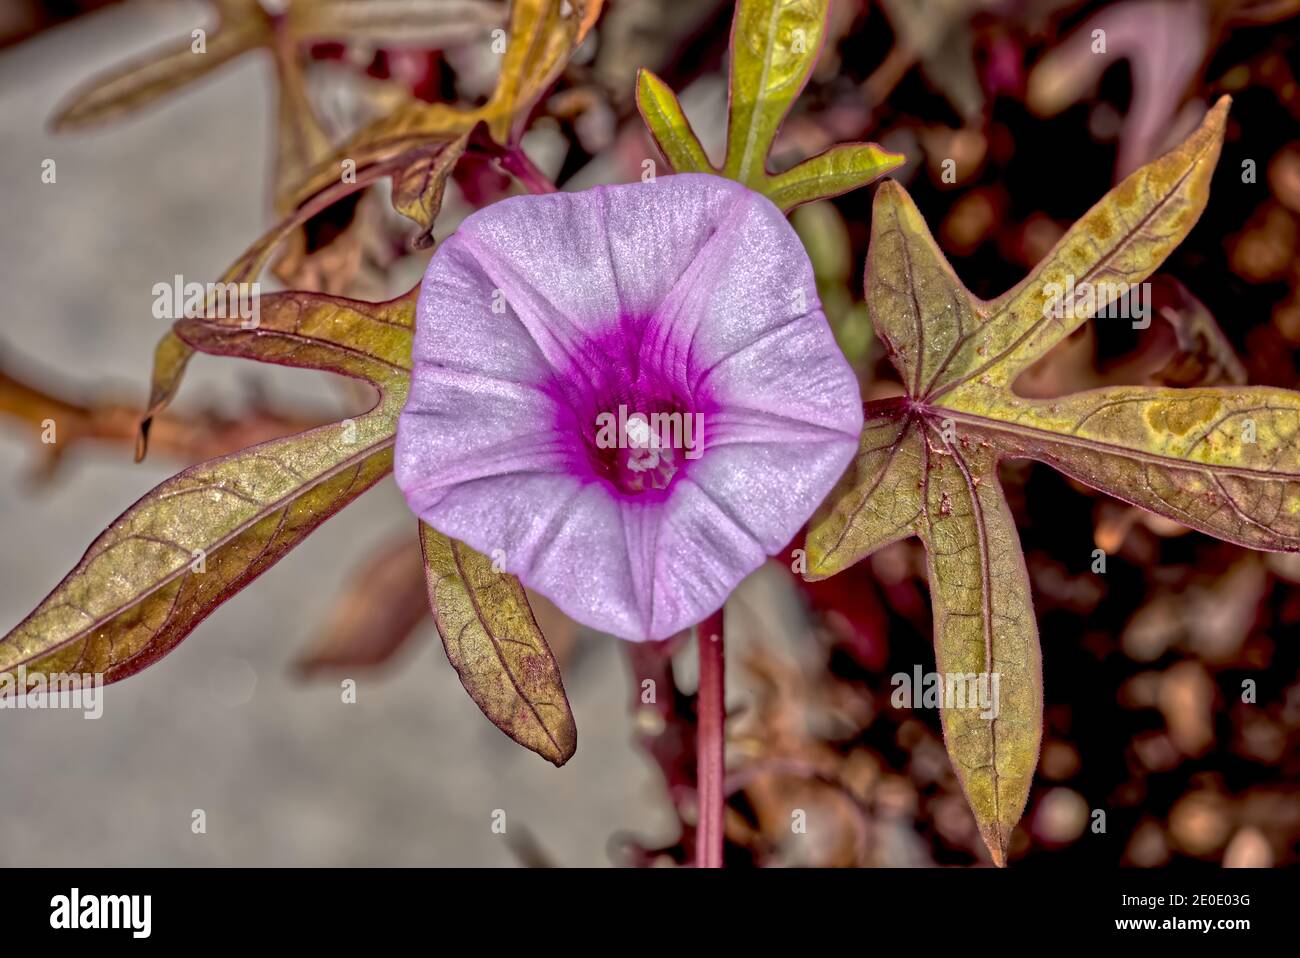 Flower of the Sweet Potato Vine, botanical name Ipomoea Batatas. This is an ornamental plant and not to be confused with the edible version. Photo tak Stock Photo